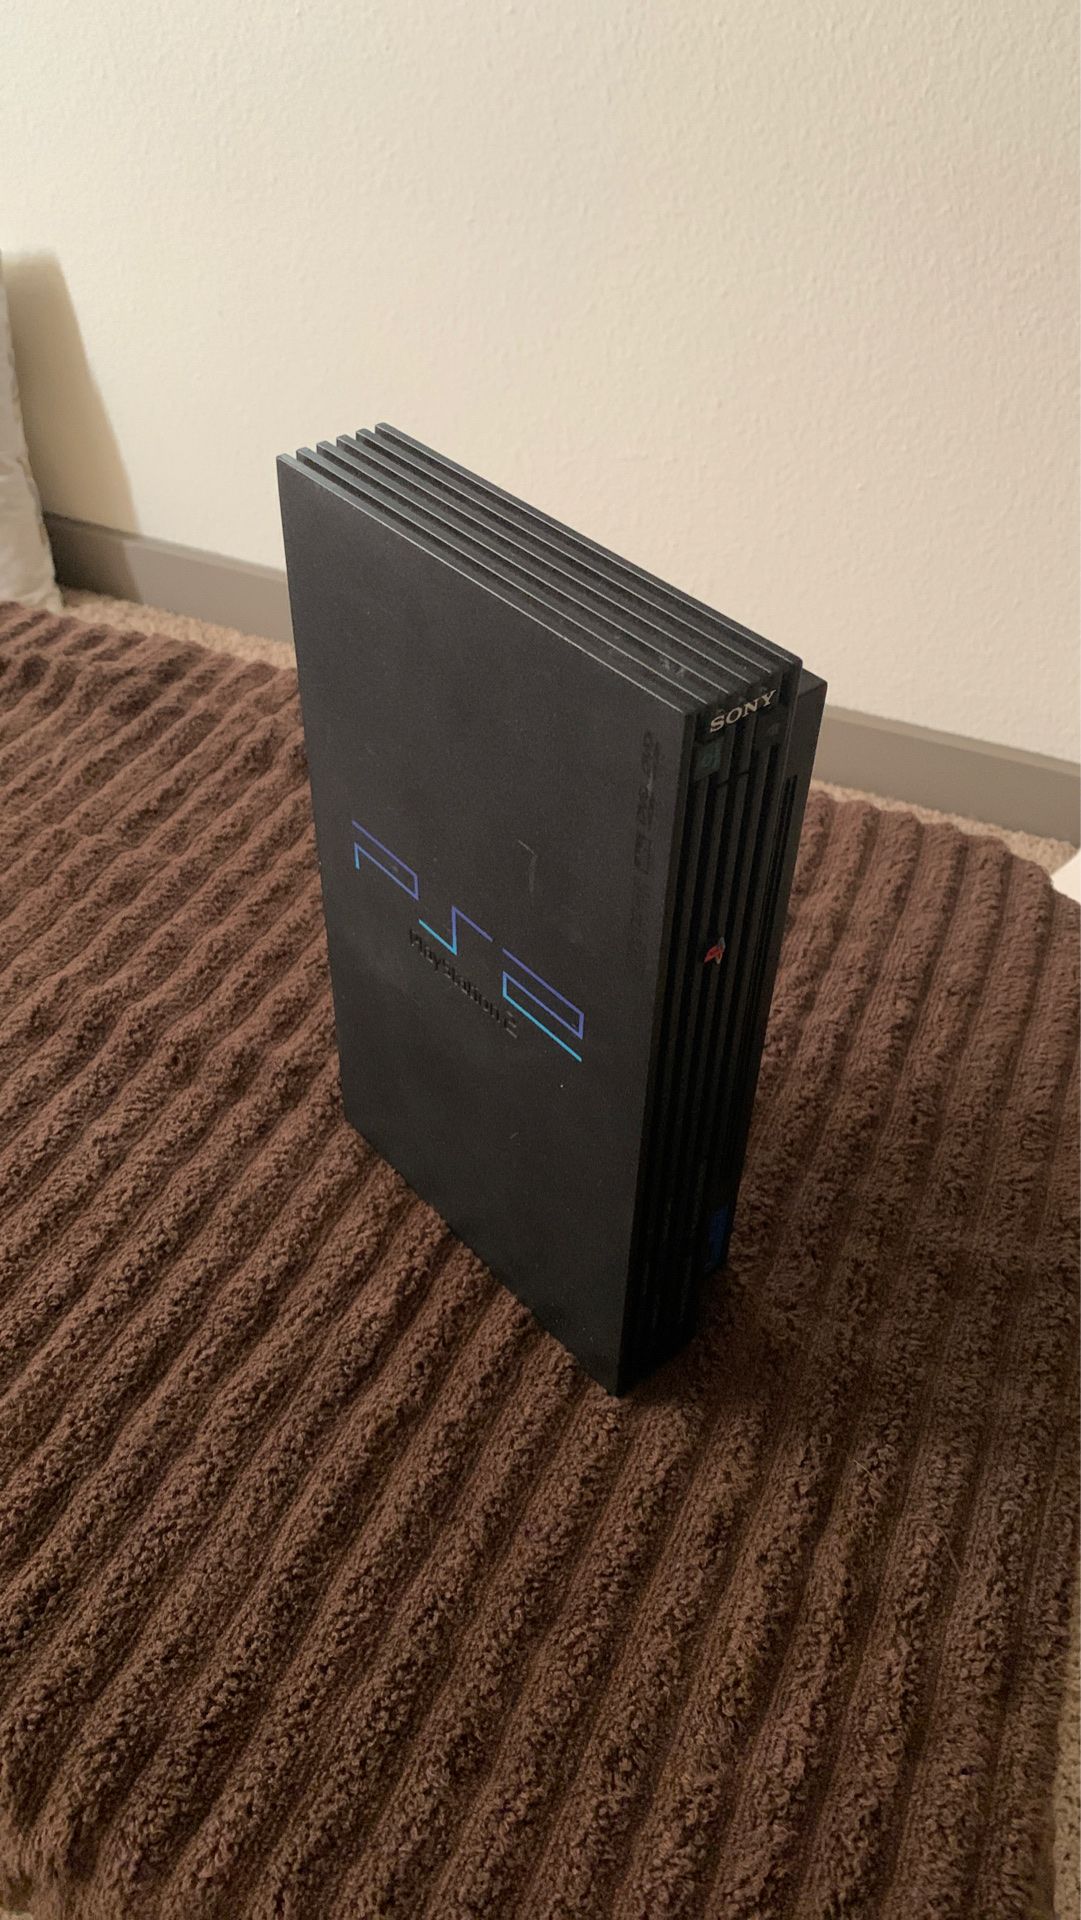 Ps2 great condition